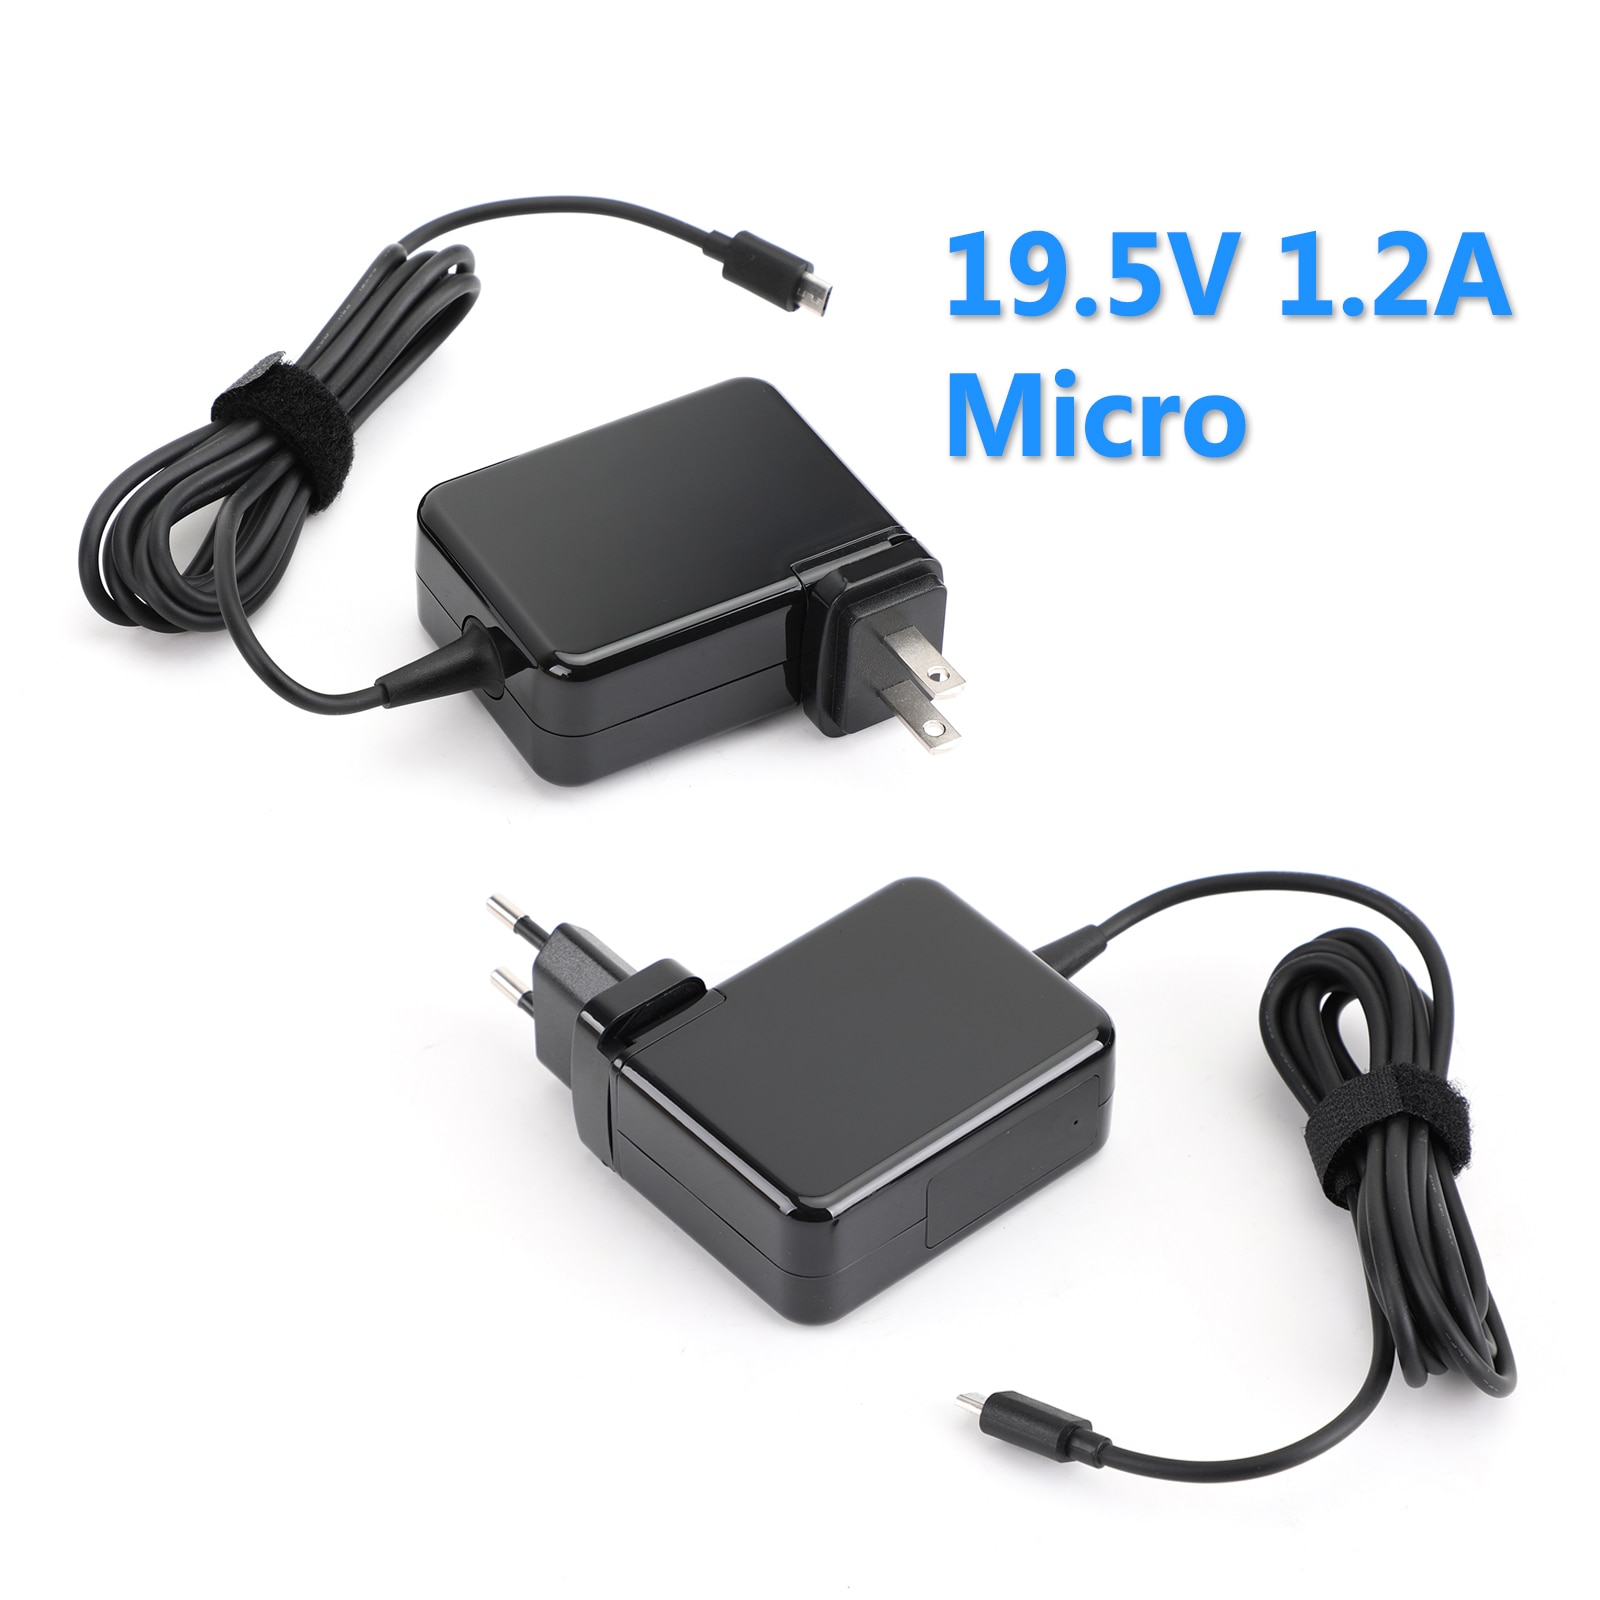 Areyourshop 24W AC DC Voeding 19.5V 1.2A charger adapter voor Dell Venue 11 Pro Laptop 7139